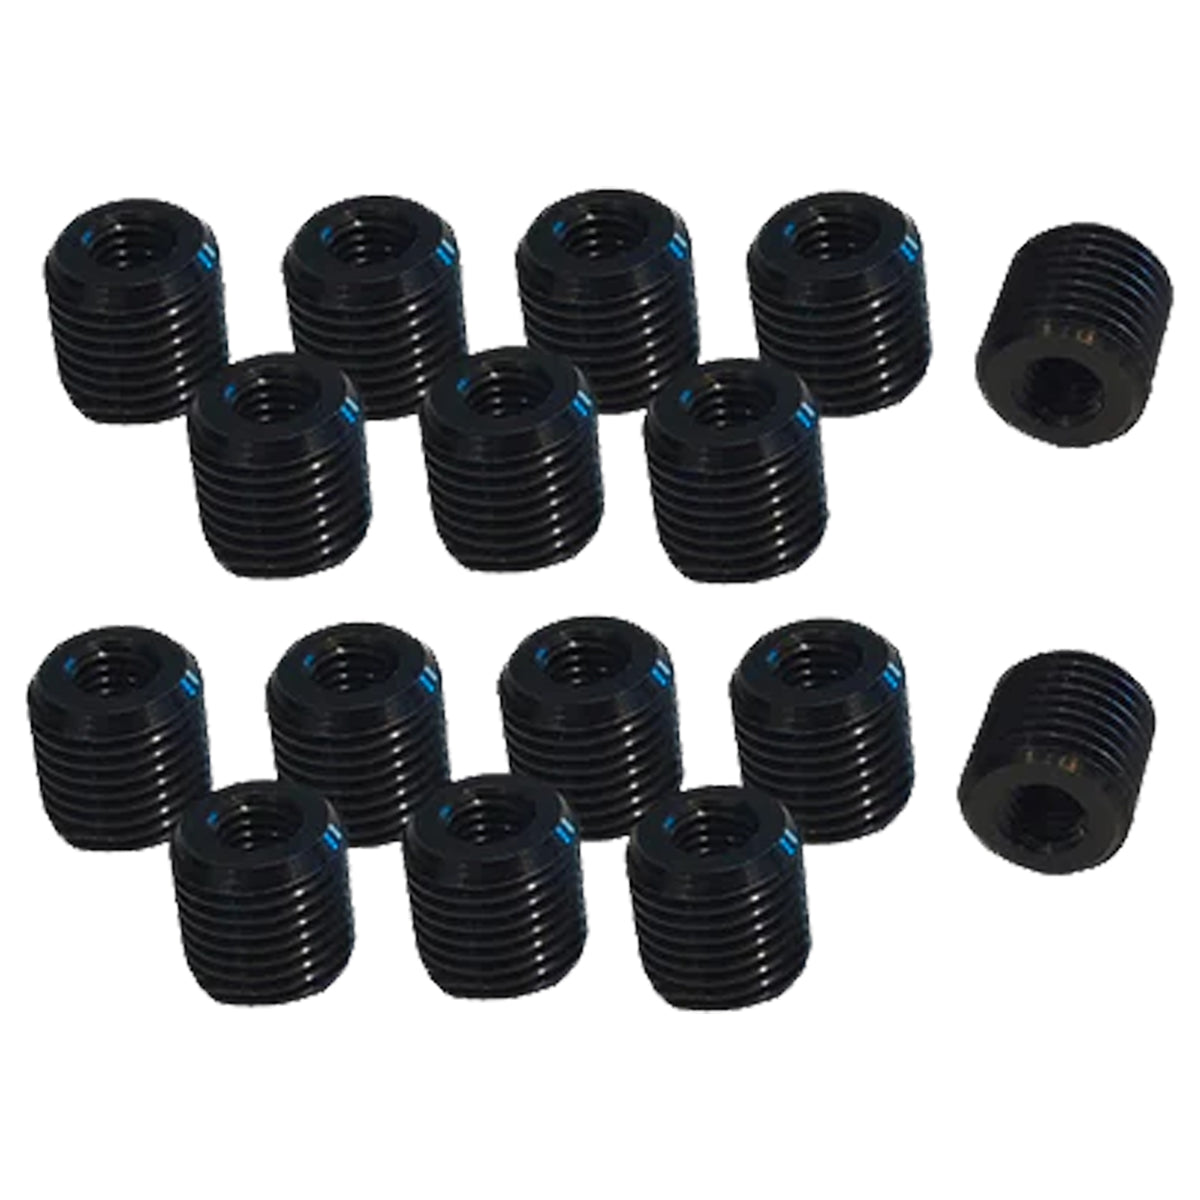 6MM Threaded Inserts Black Oxide-Coated Ford 6.7L EGR Repair 